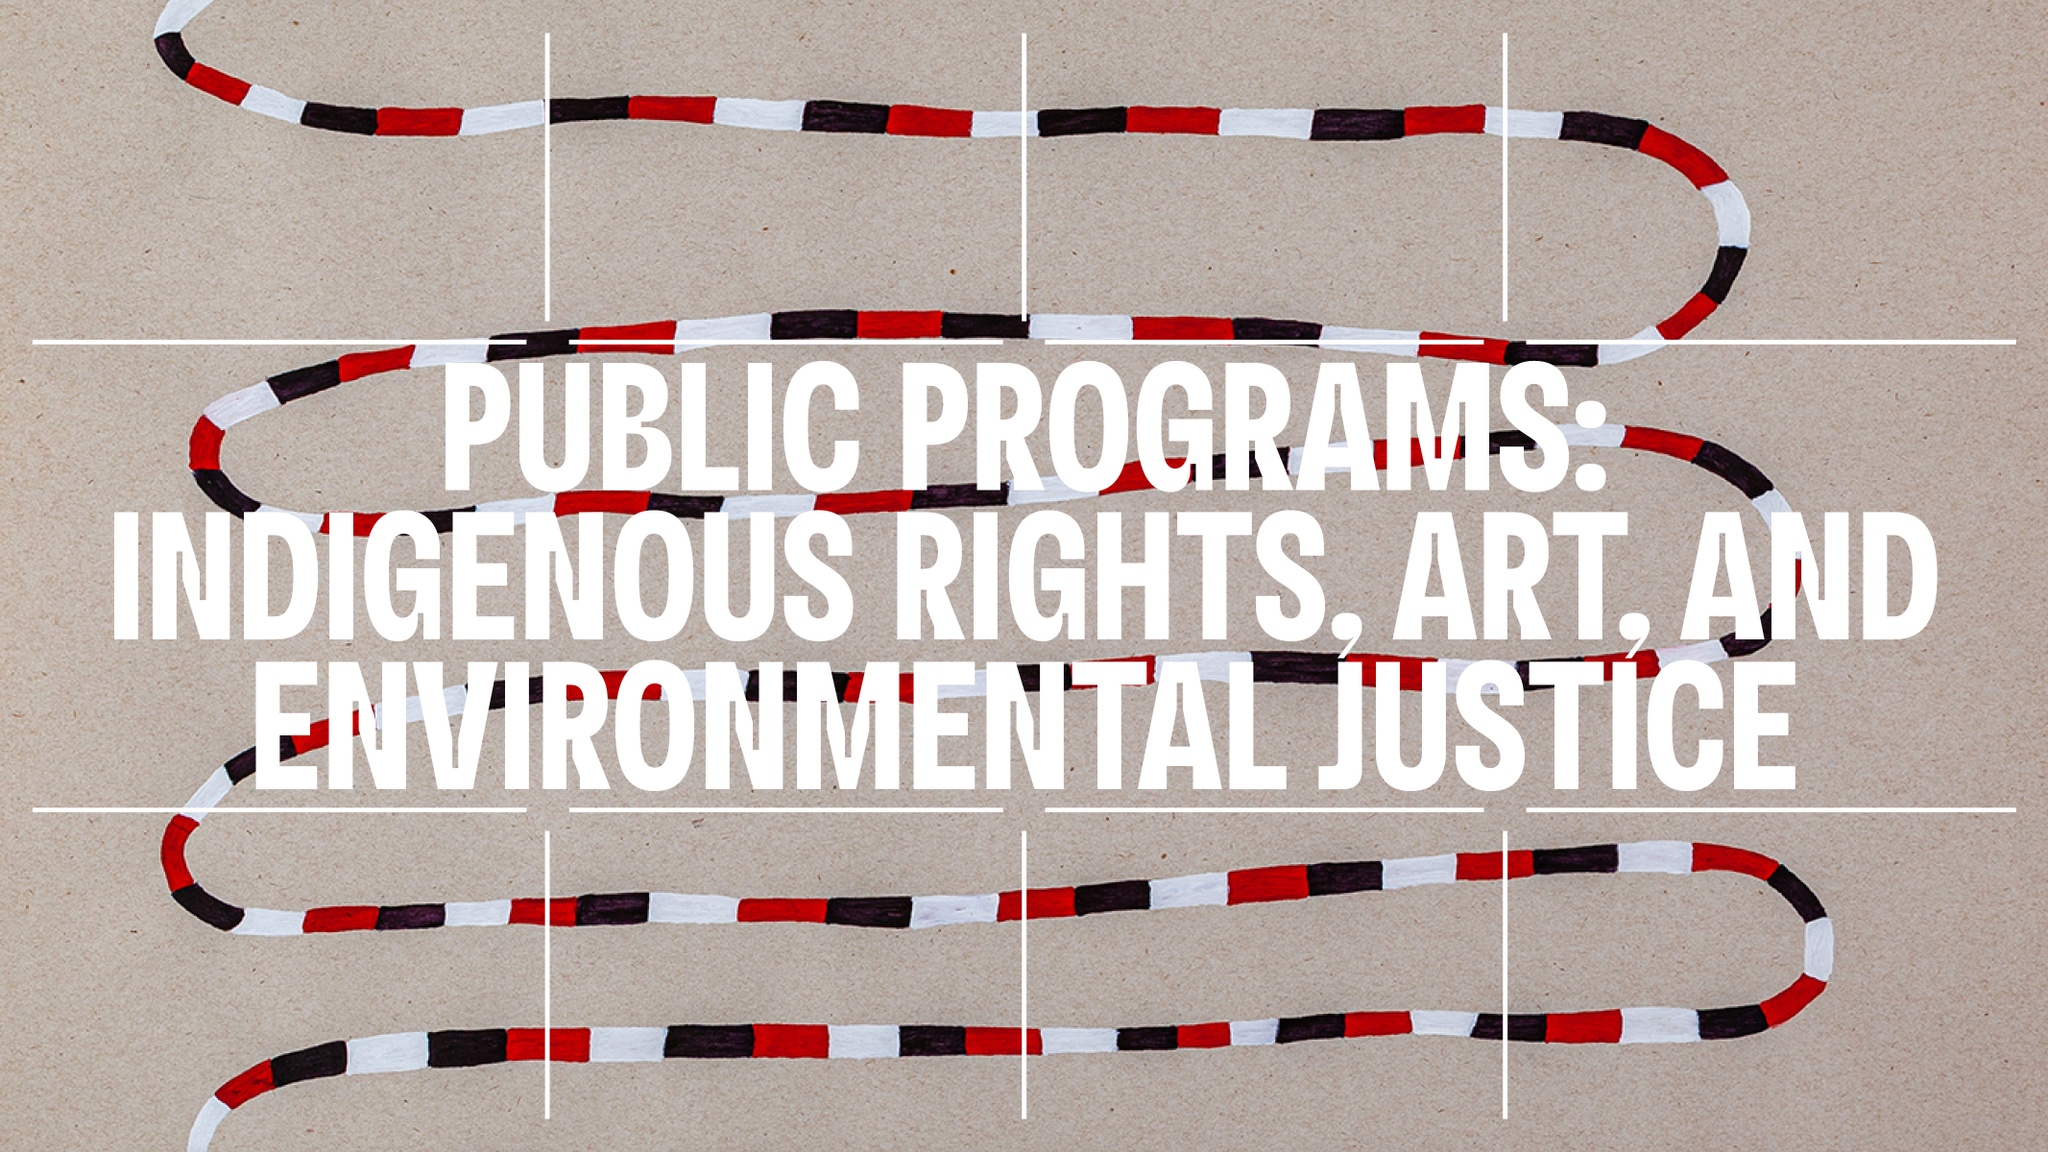 The event title Public Programs: Indigenous Rights, Art, and Environmental Justice superimposed in white text on a drawing. The drawing shows a continuous line that doubles back on itself to create six roughly parallel lines on a sand-colored background. The line is made up of alternating red, white, and black segments, vaguely resembling a snake's patterning.